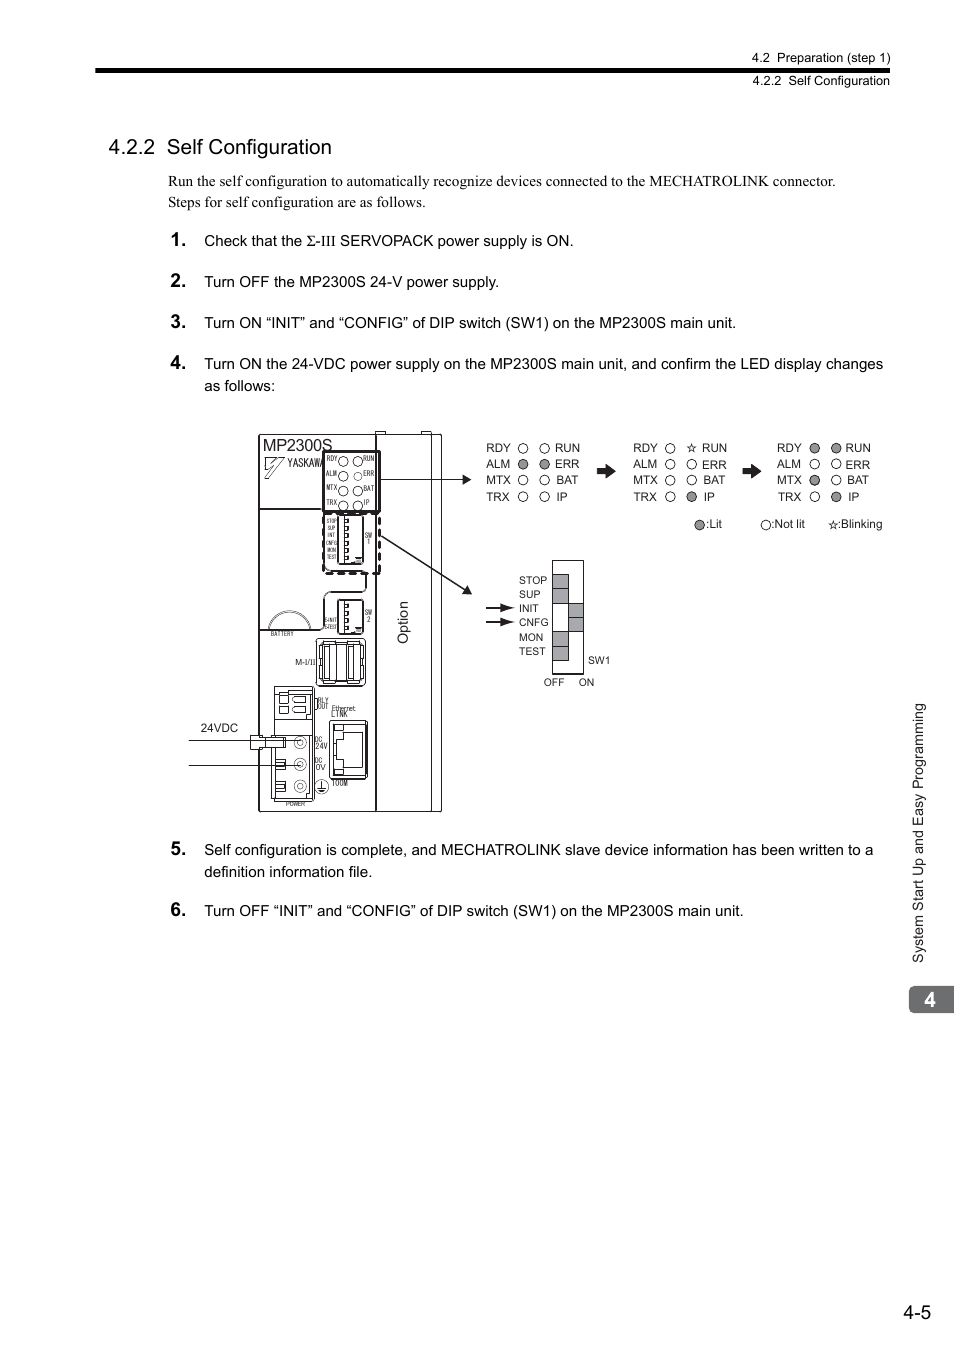 2 self configuration, Mp2300s, Check that the σ-iii servopack power supply is on | System start up and easy programming, Option | Yaskawa MP2300S Basic Module User Manual | Page 121 / 460